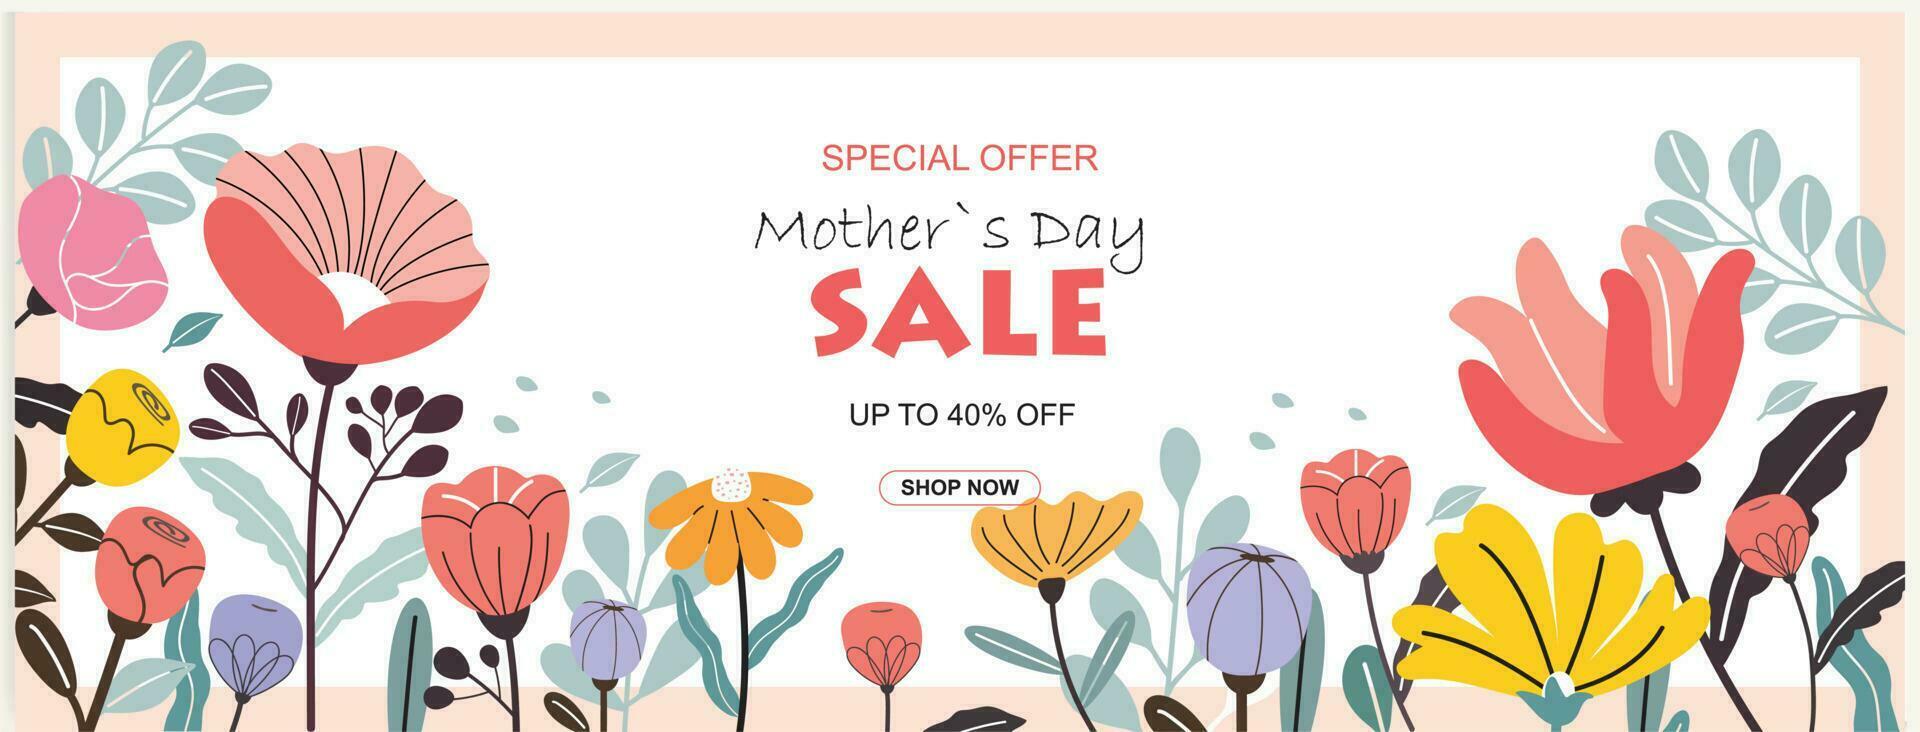 Mother's Day sale banner, poster, and background design with beautiful blossom flowers. vector illustration.